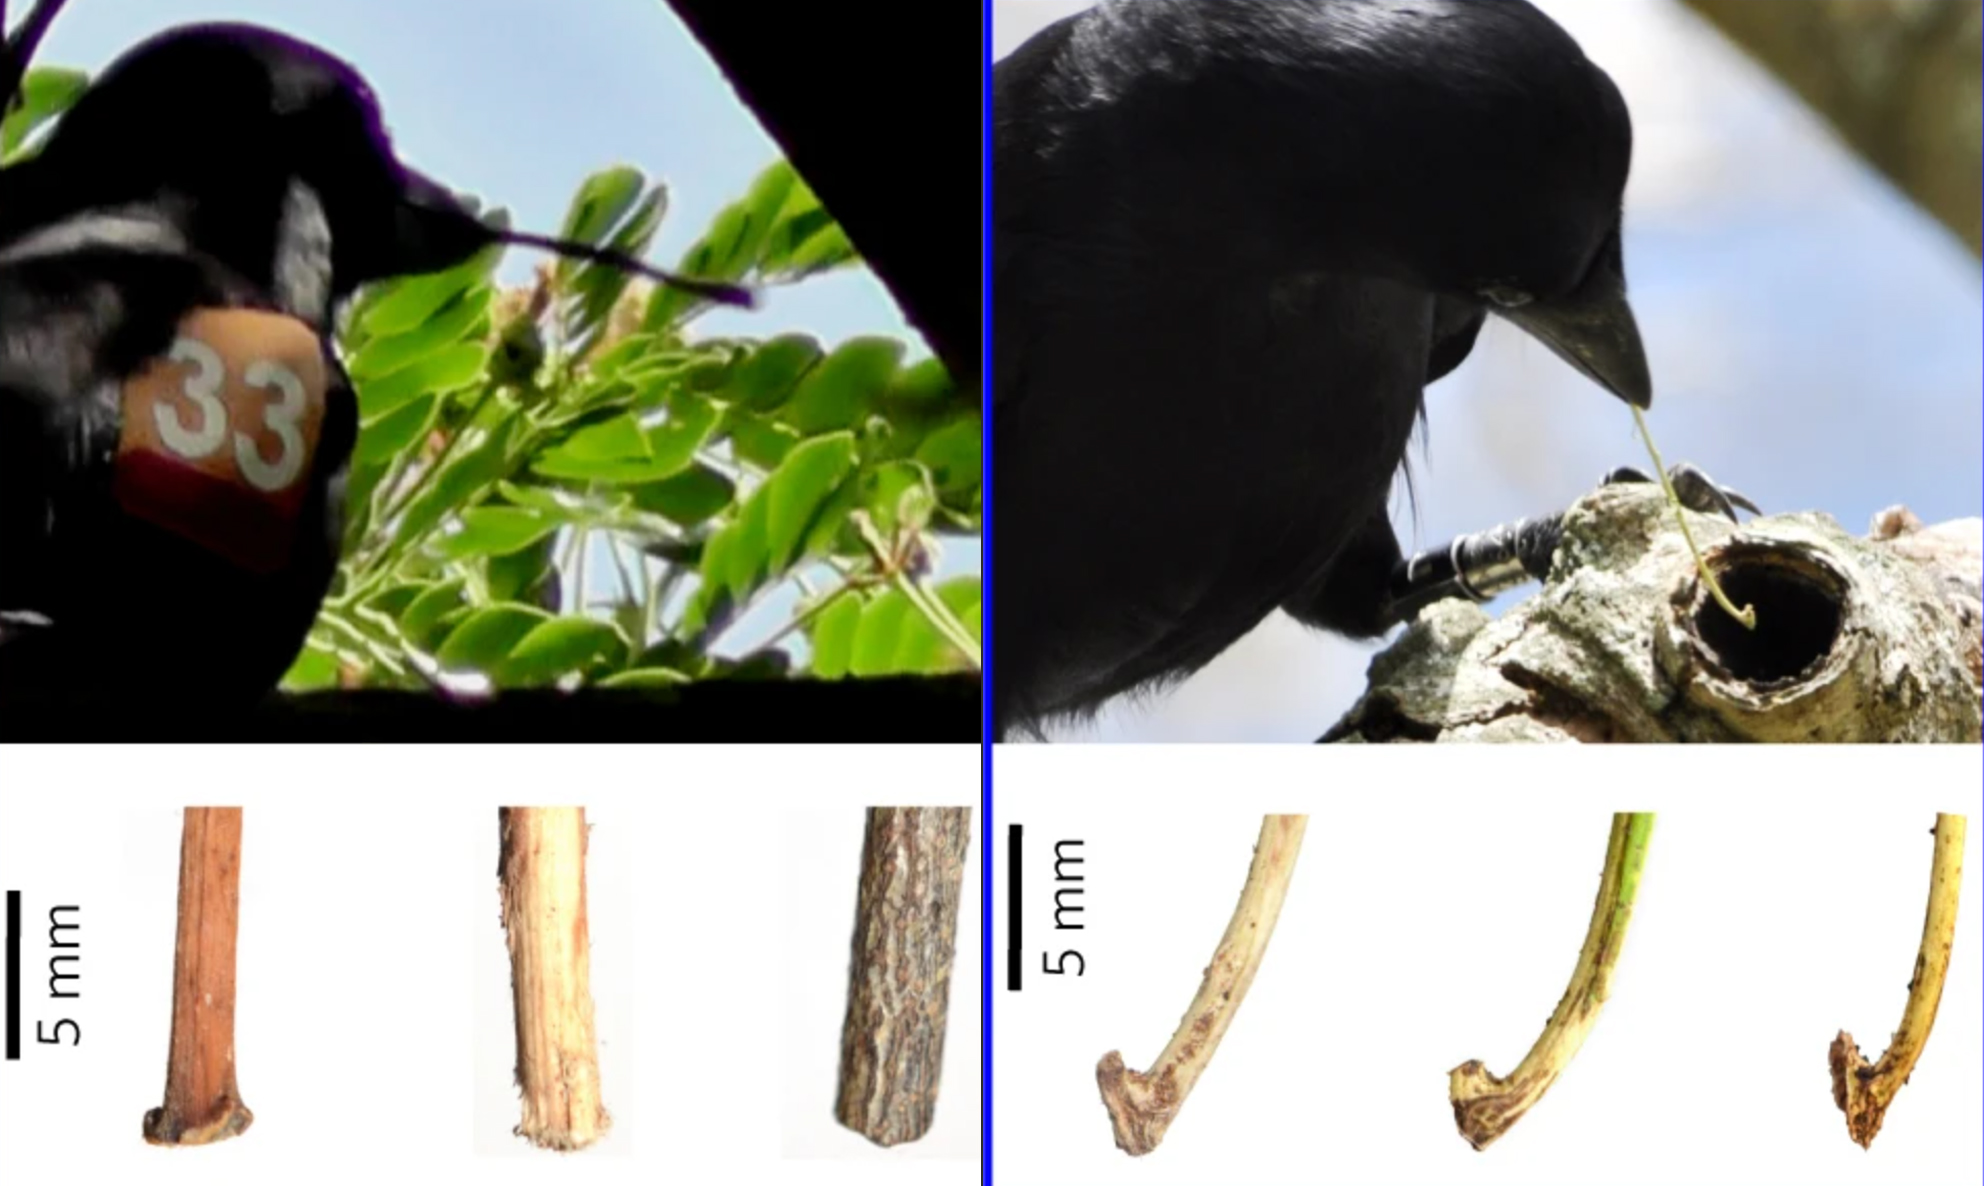 Non- (left) and hooked (right) tools and their use. (James St Clair et al, Nat. Ecol. Evol, 2018)